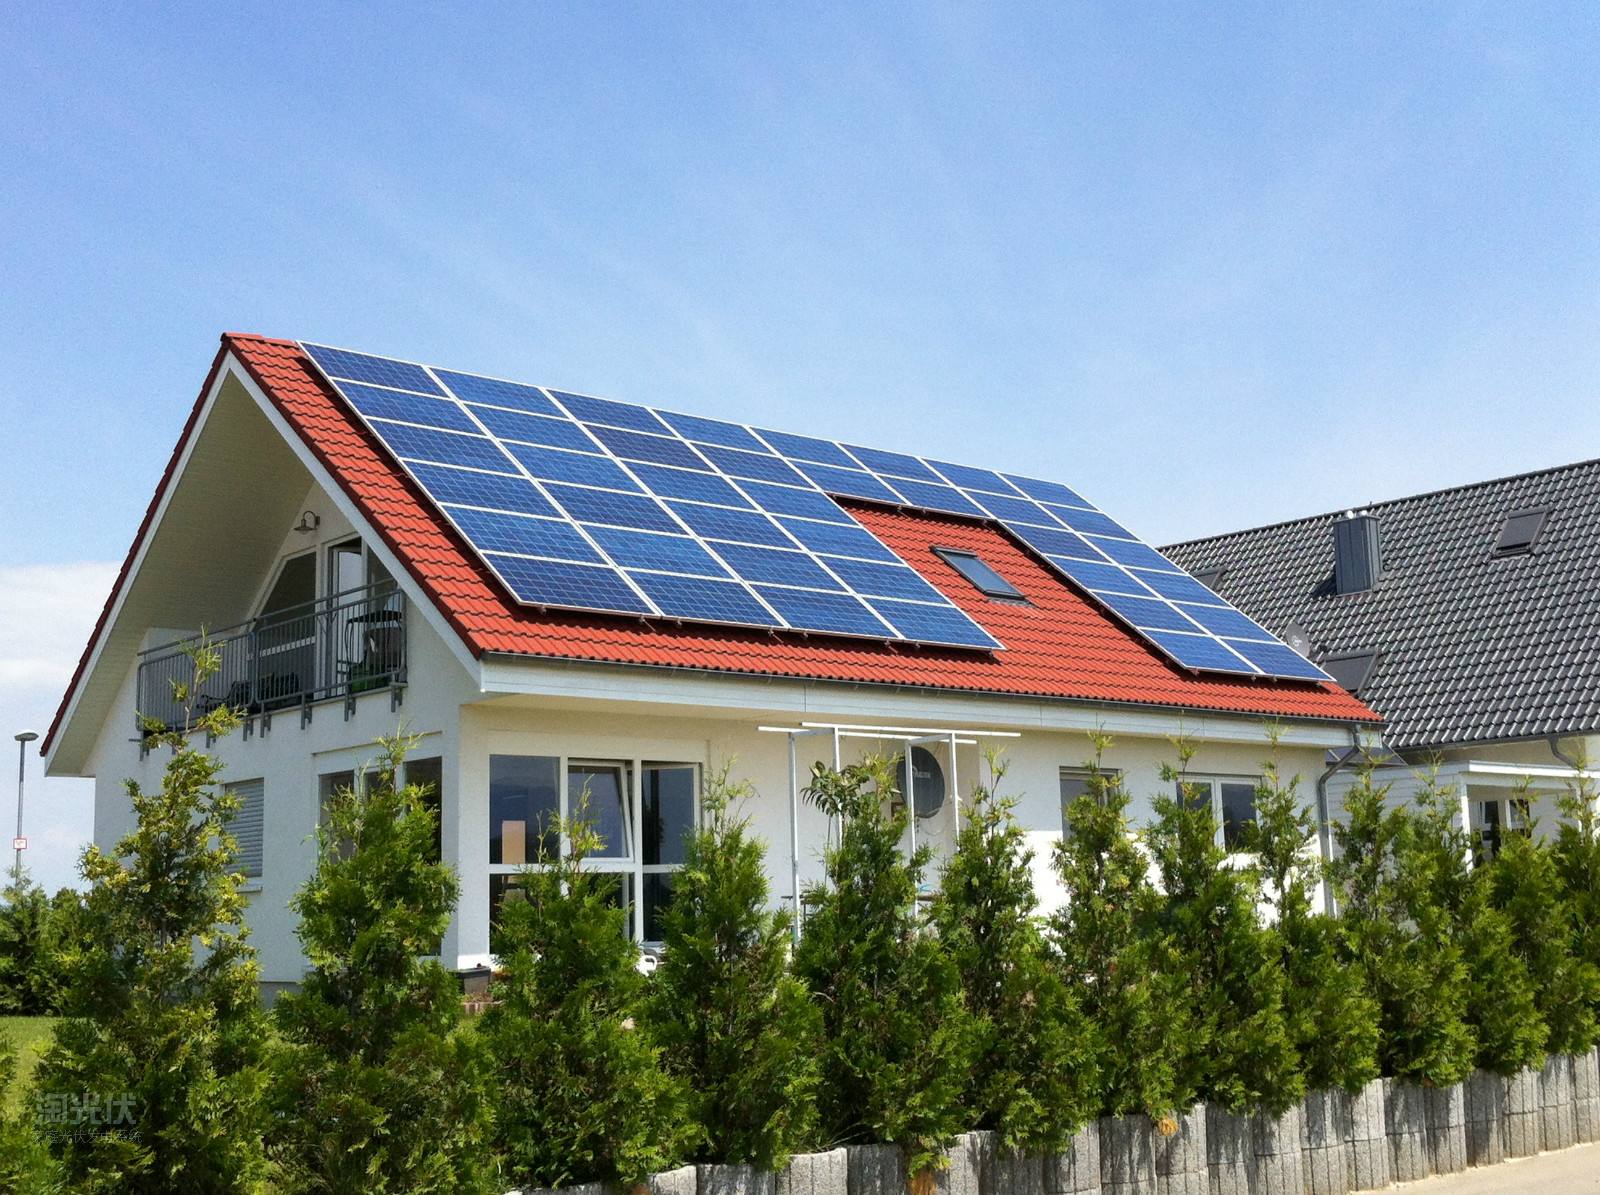 Little Knowledge About Photovoltaic System